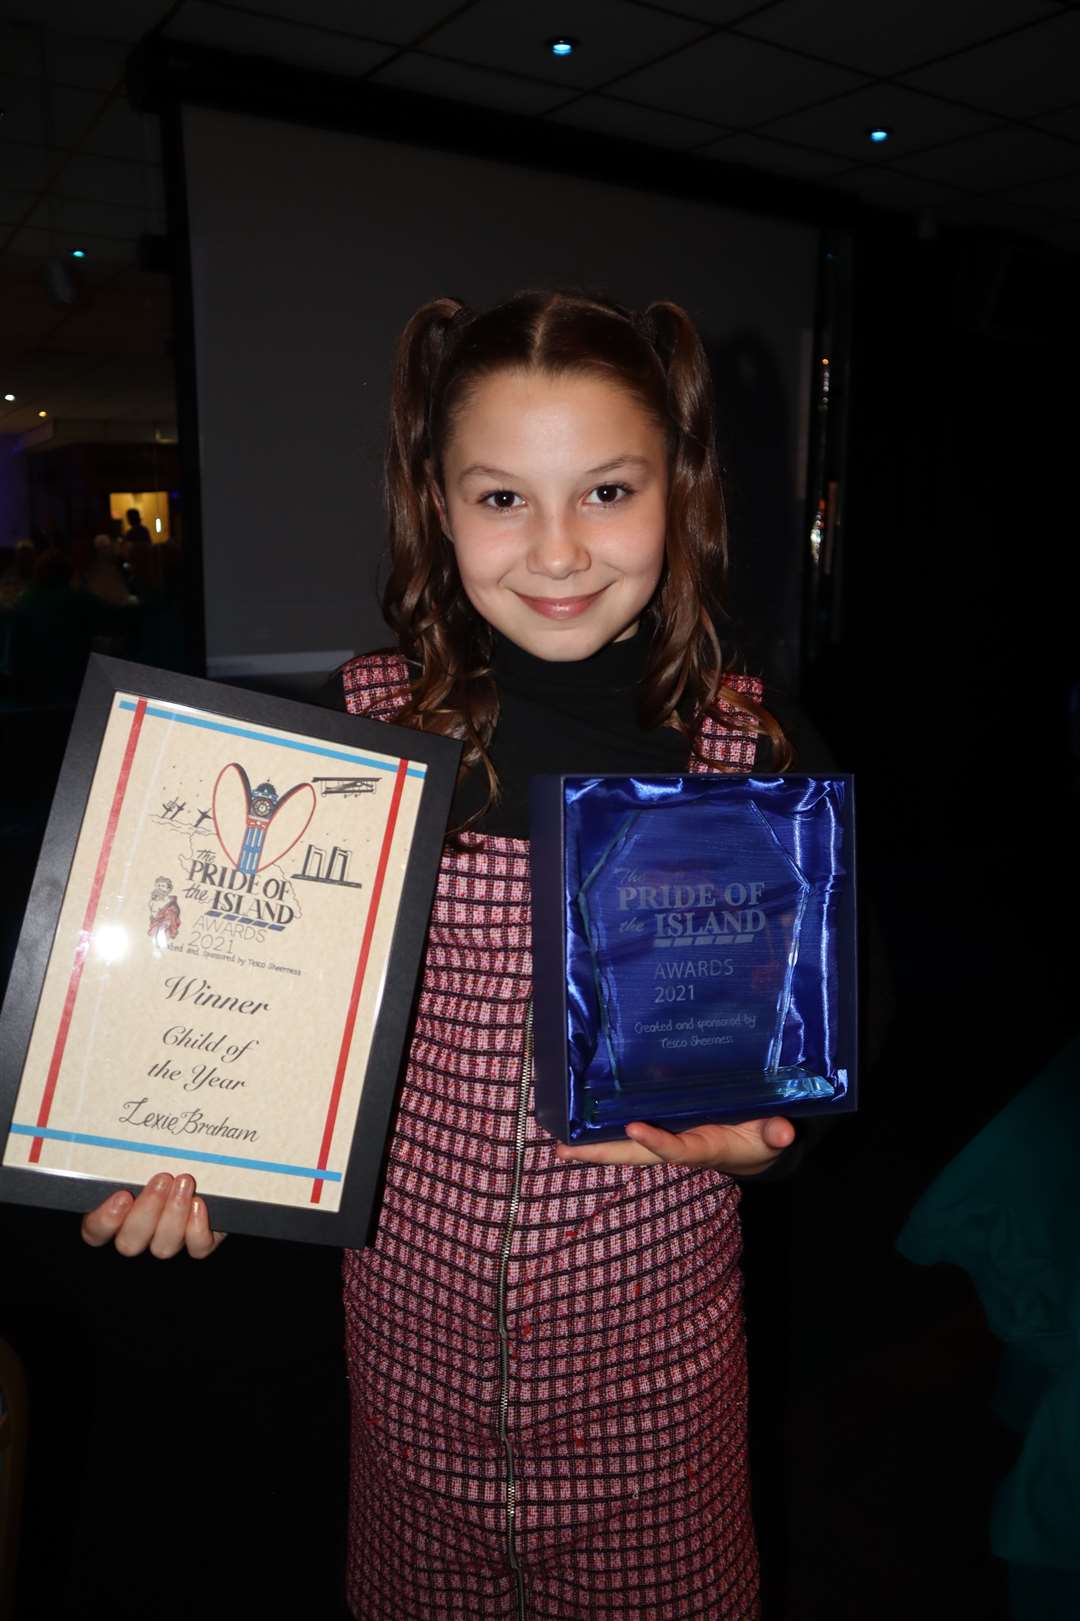 Lexie Braham shared the child of the year title in the Tesco Pride of the Island awards at Layzells